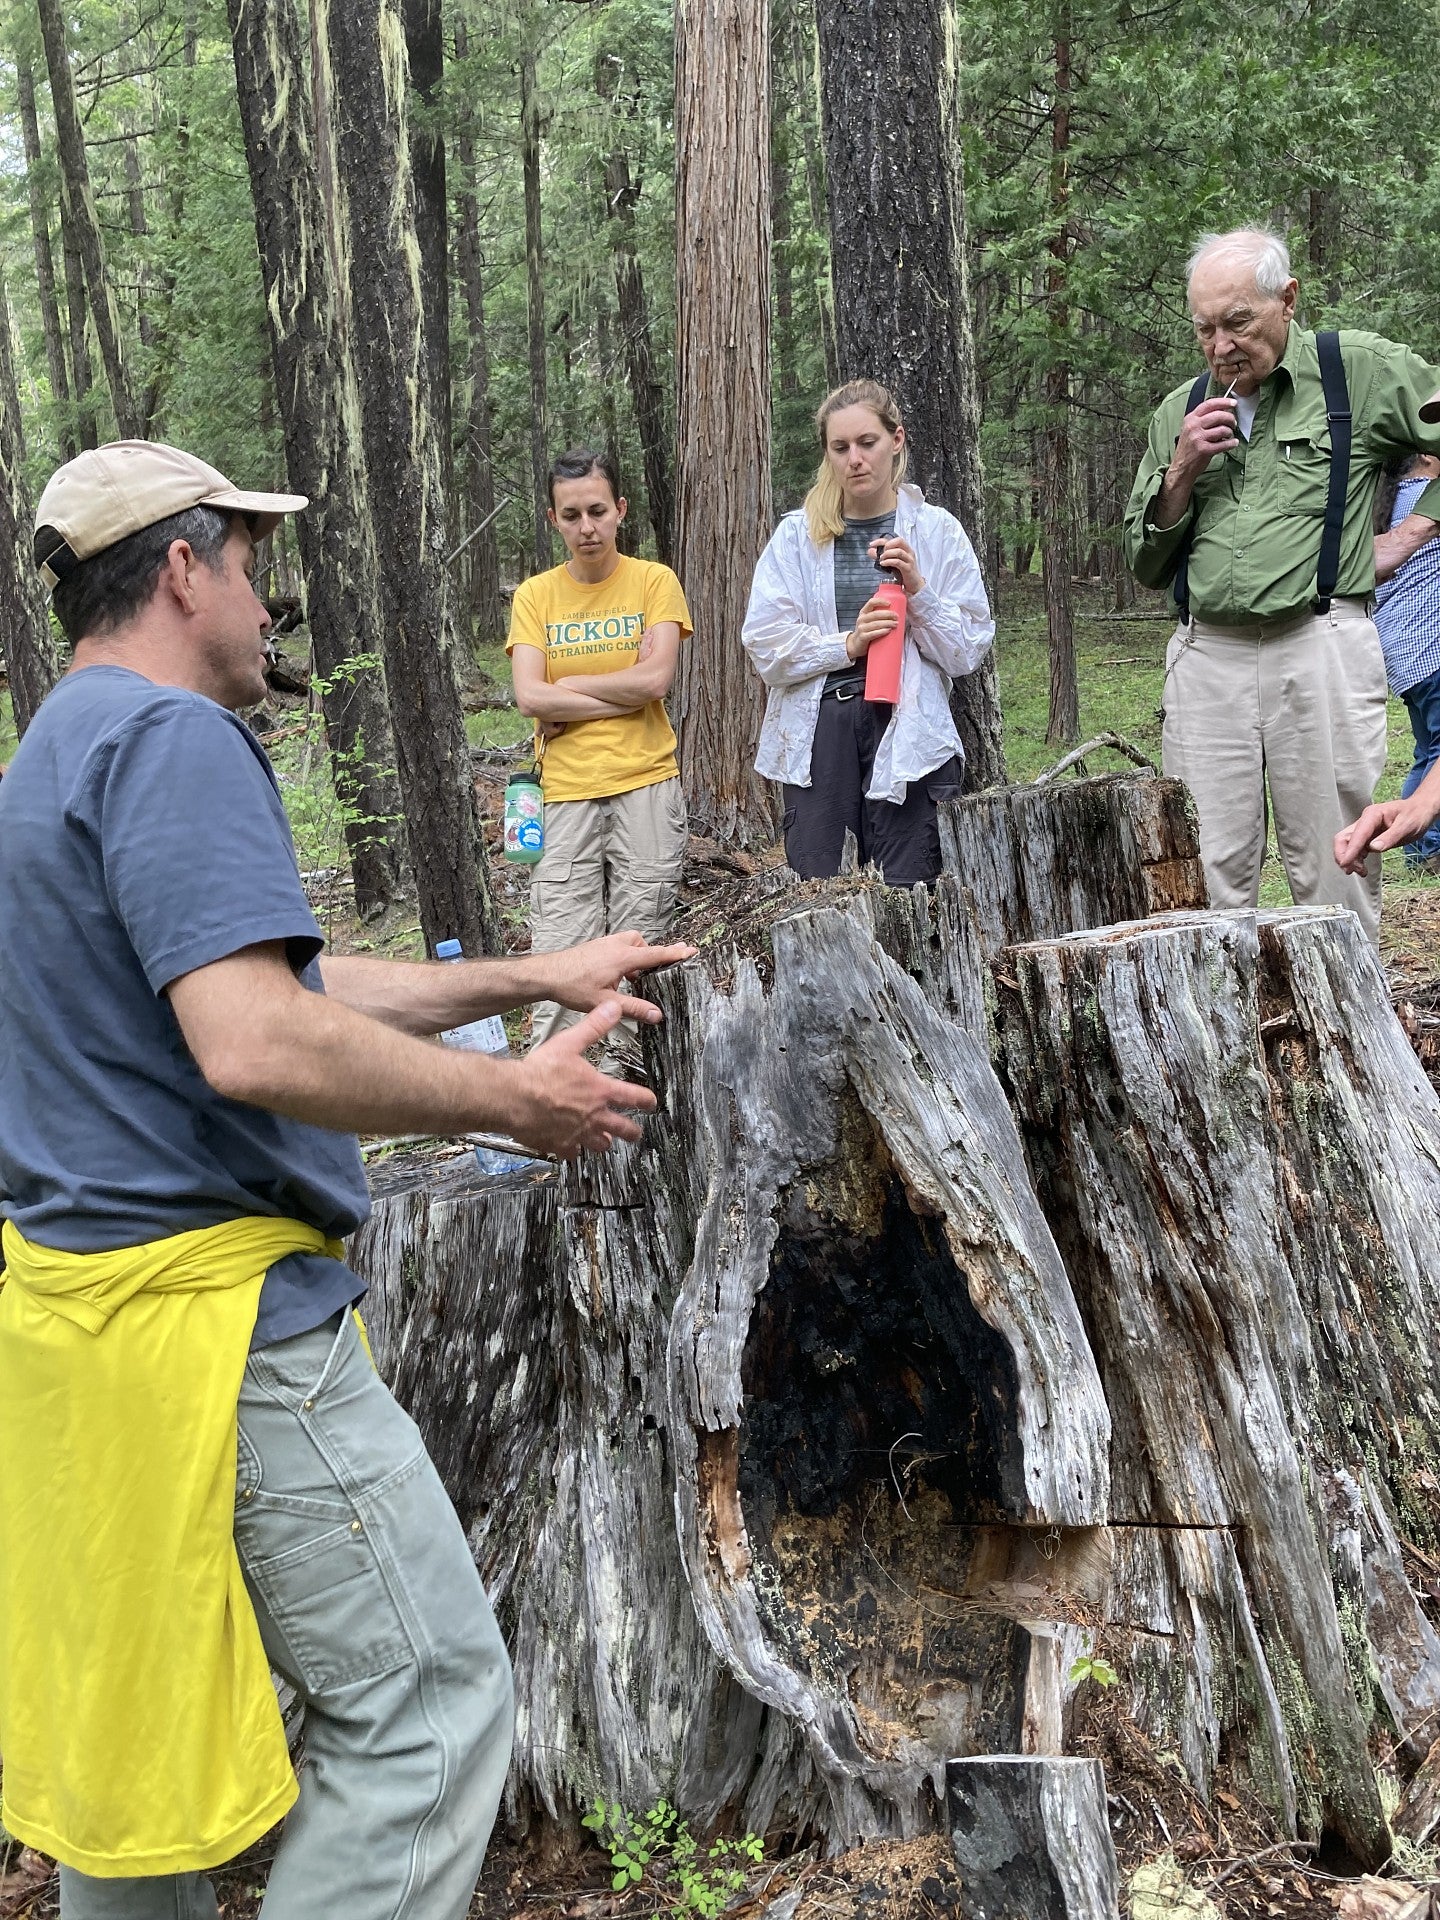 James Johnston explains how trees record fires in the annual growth rings 